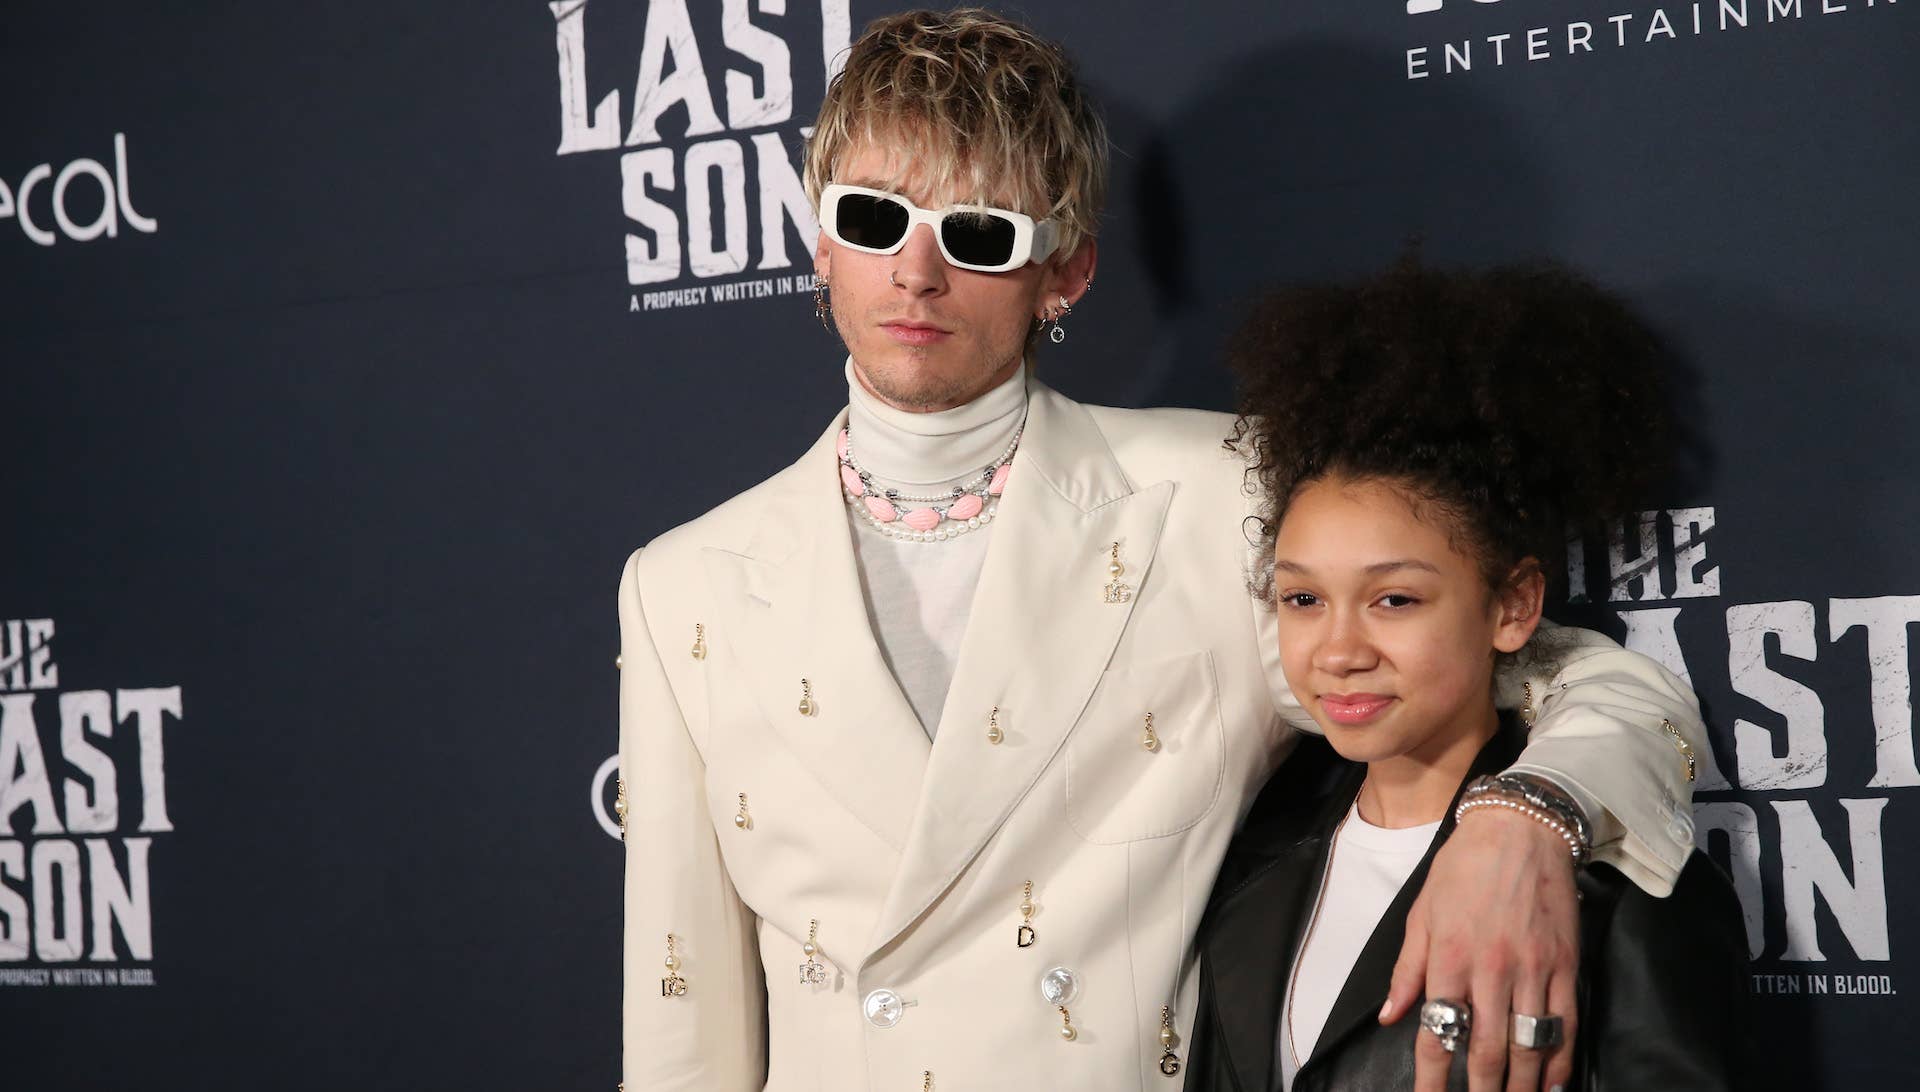 Machine Gun Kelly and his daughter attend premier of 'The Last Son'